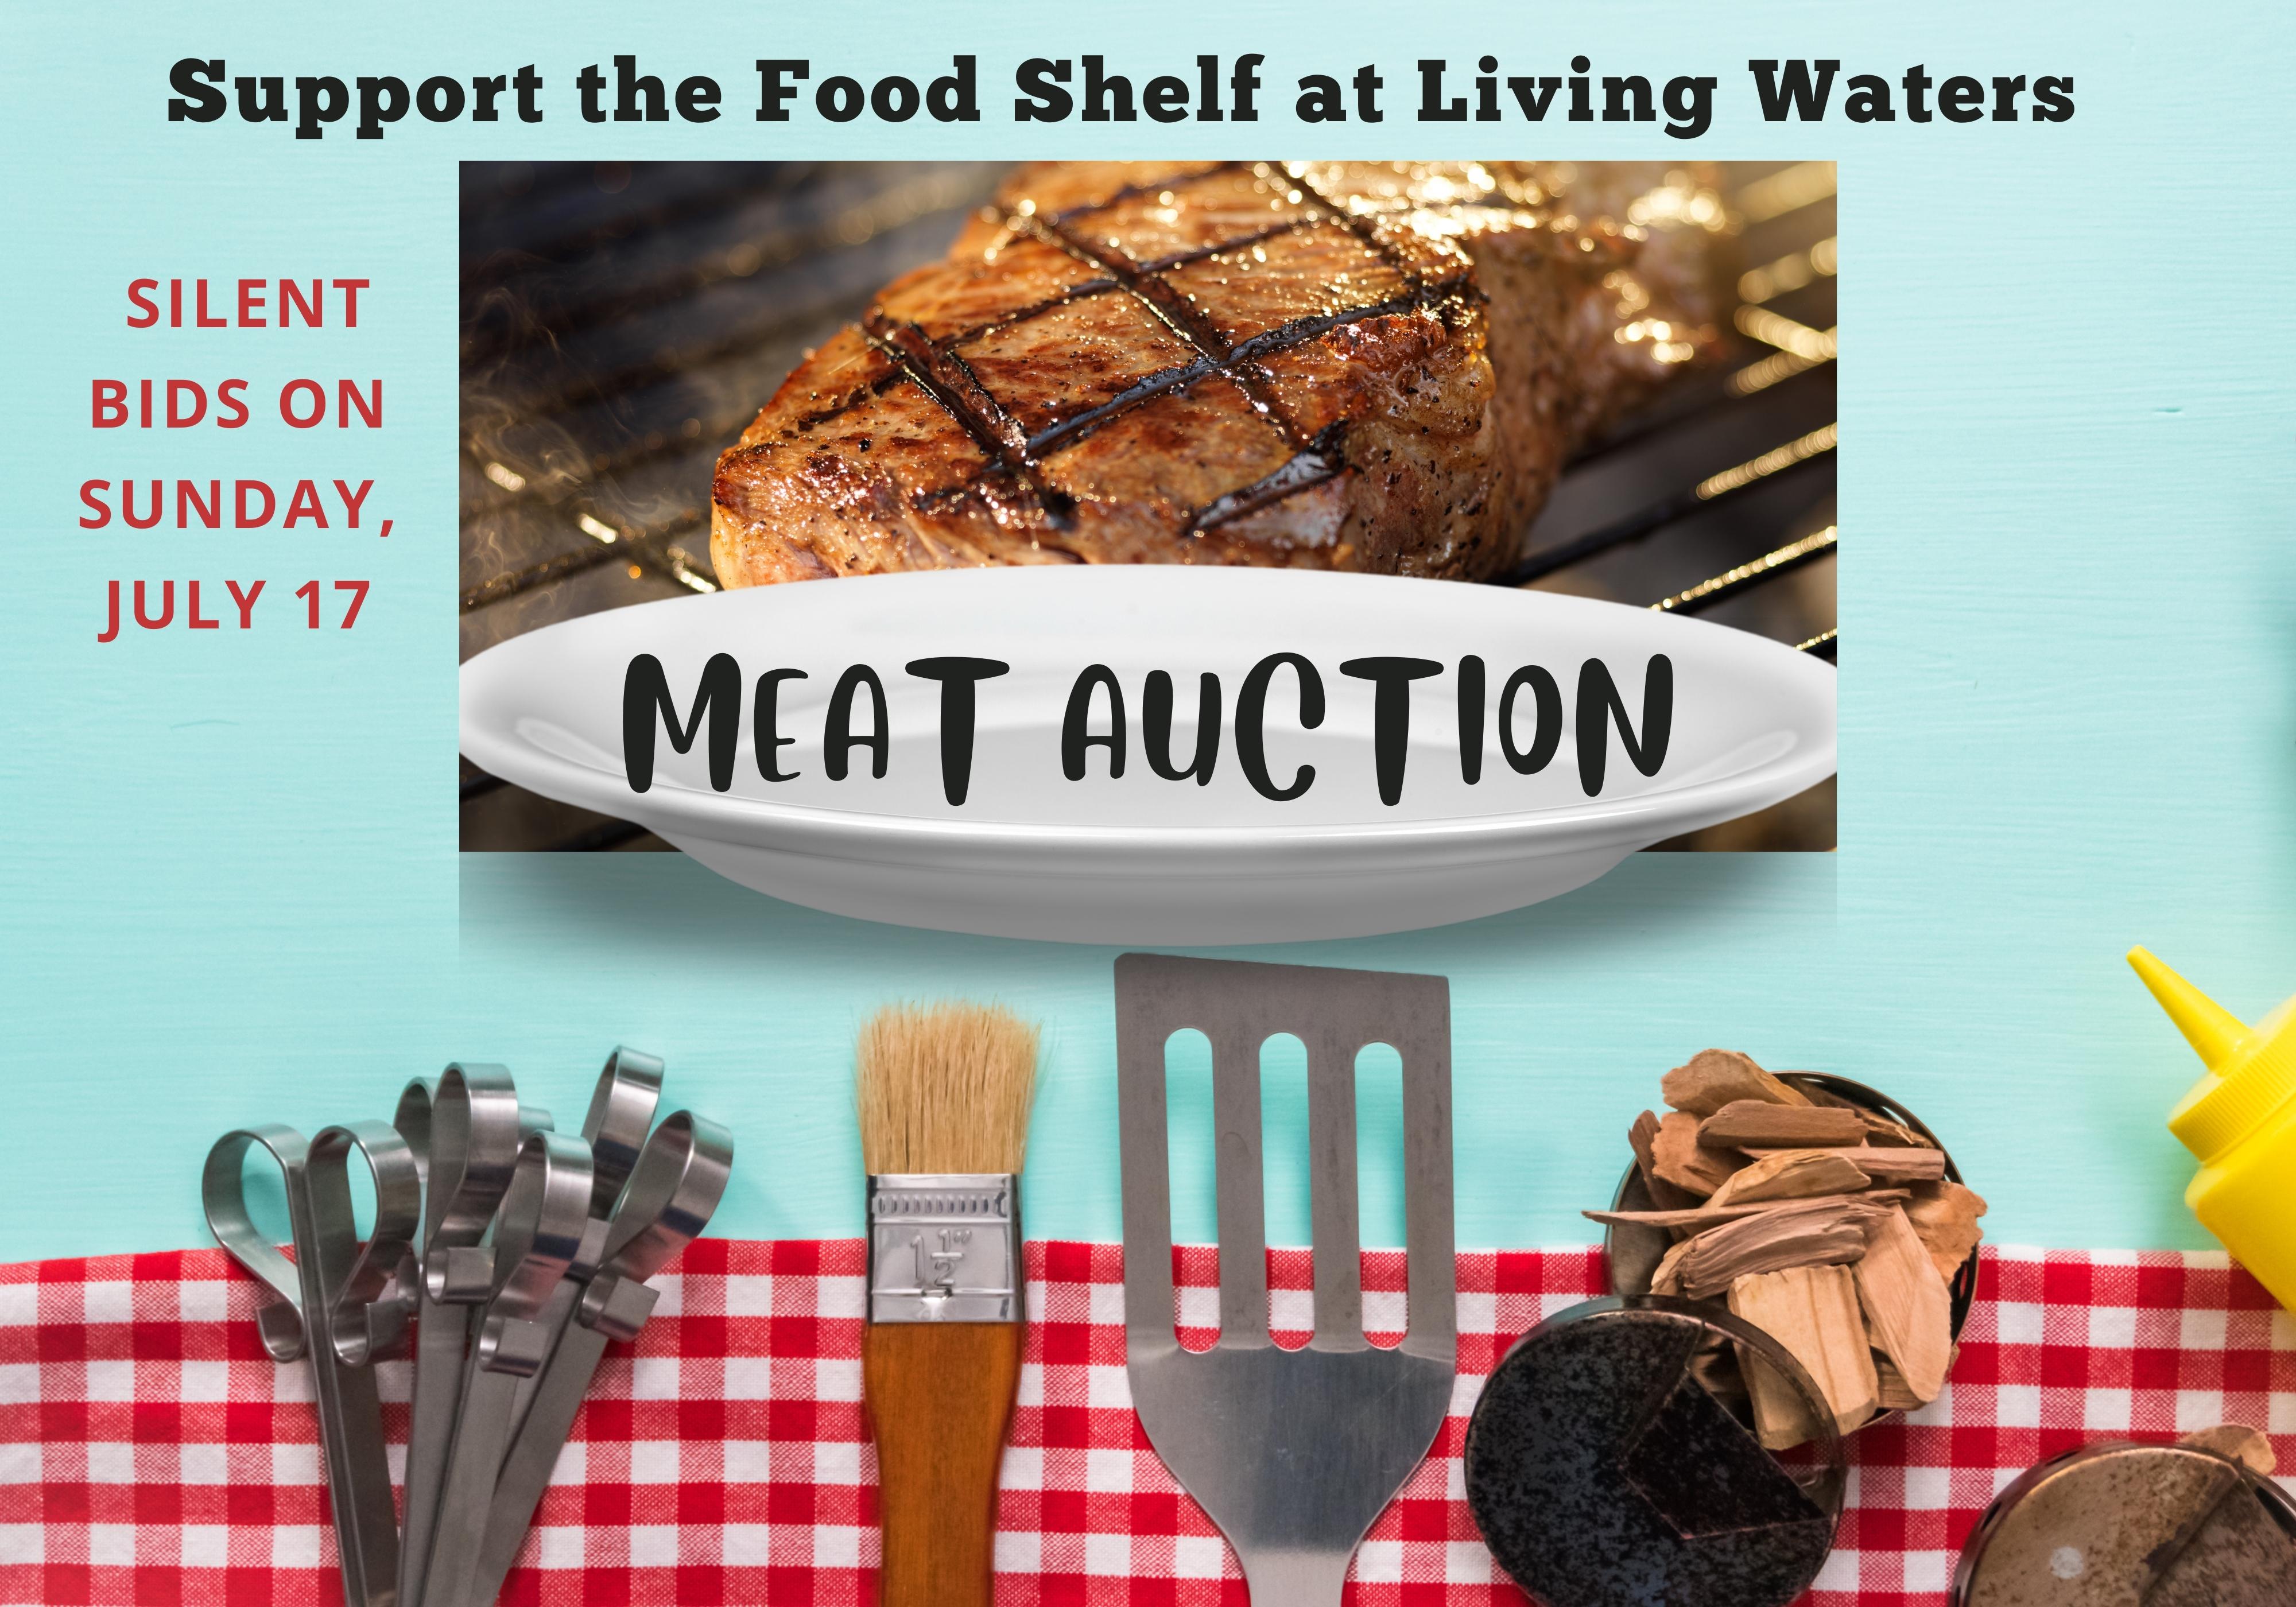 Sunday, July 17th – Meat Auction